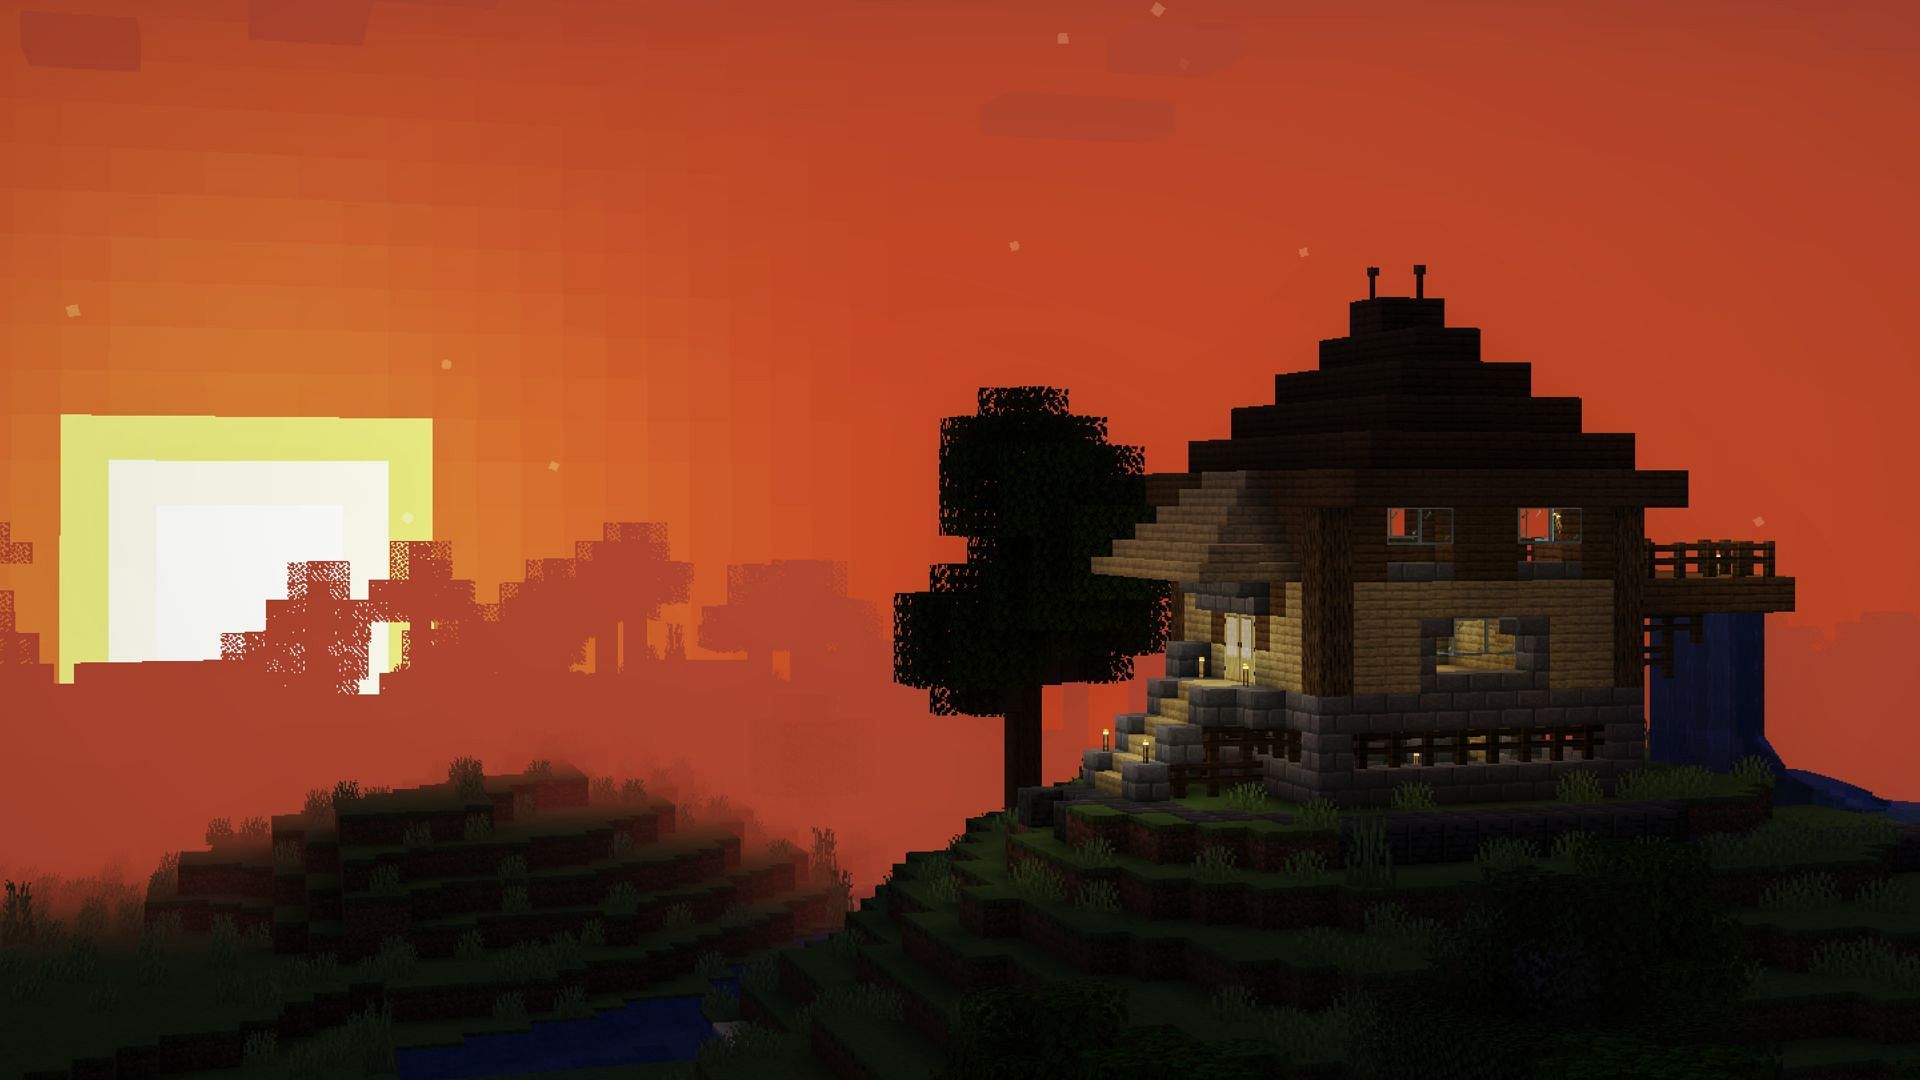 Minecraft players discuss their in-game houses becoming their real houses (Image via Mojang Studios)